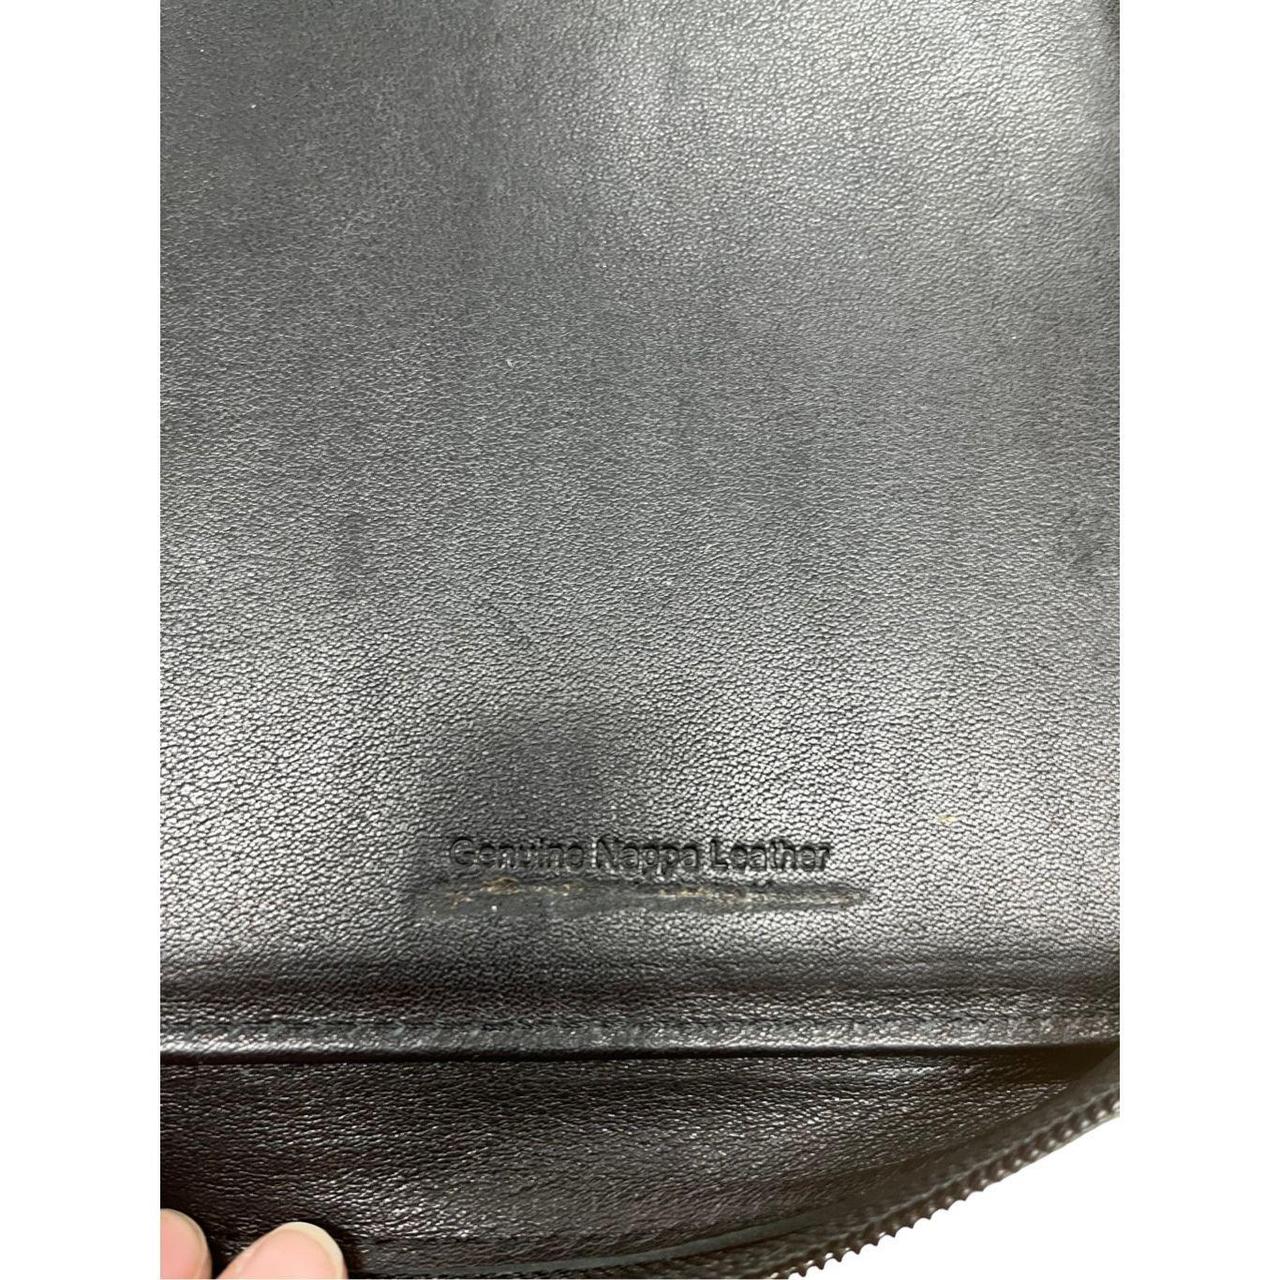 Franklin Covey Planner, genuine leather, see pics - Depop